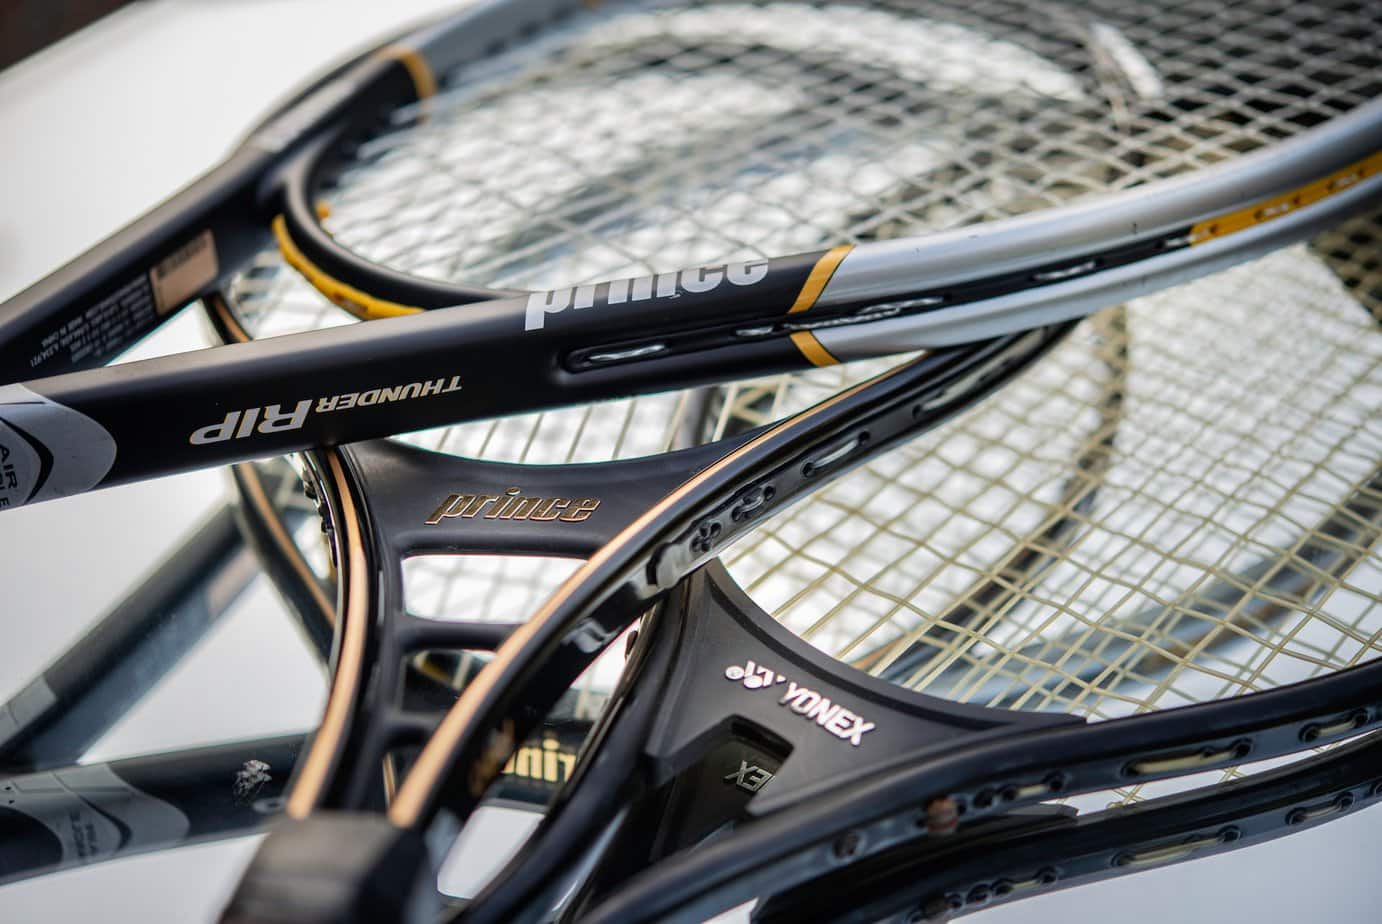 What to follow when buying tennis racquets?